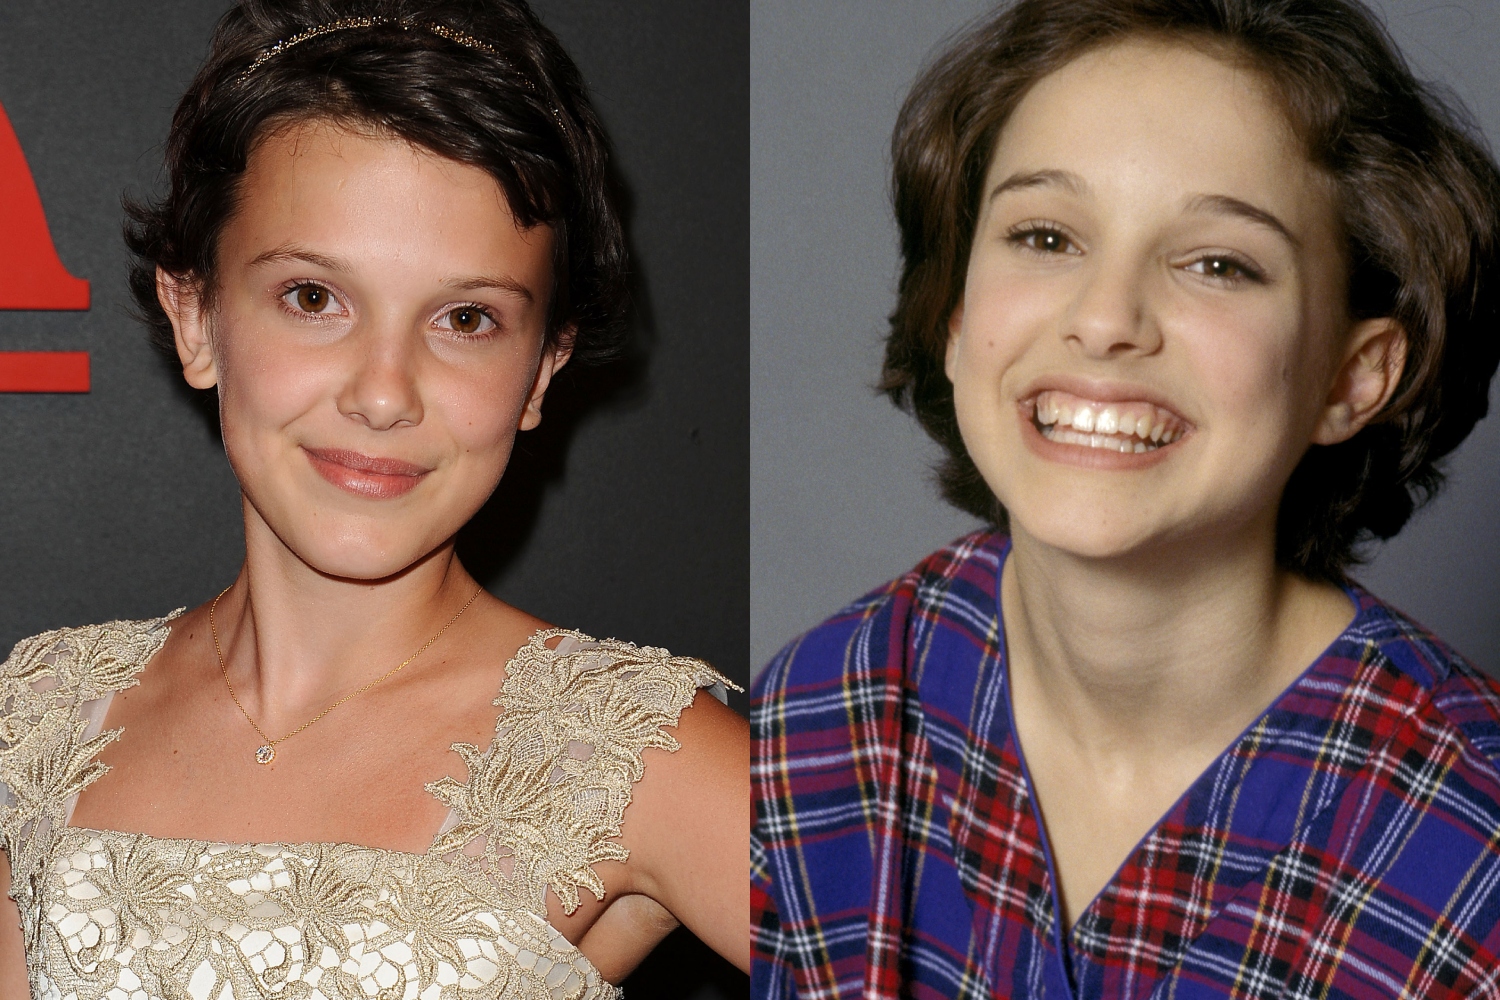 millie-bobby-brown-natalie-portman-young